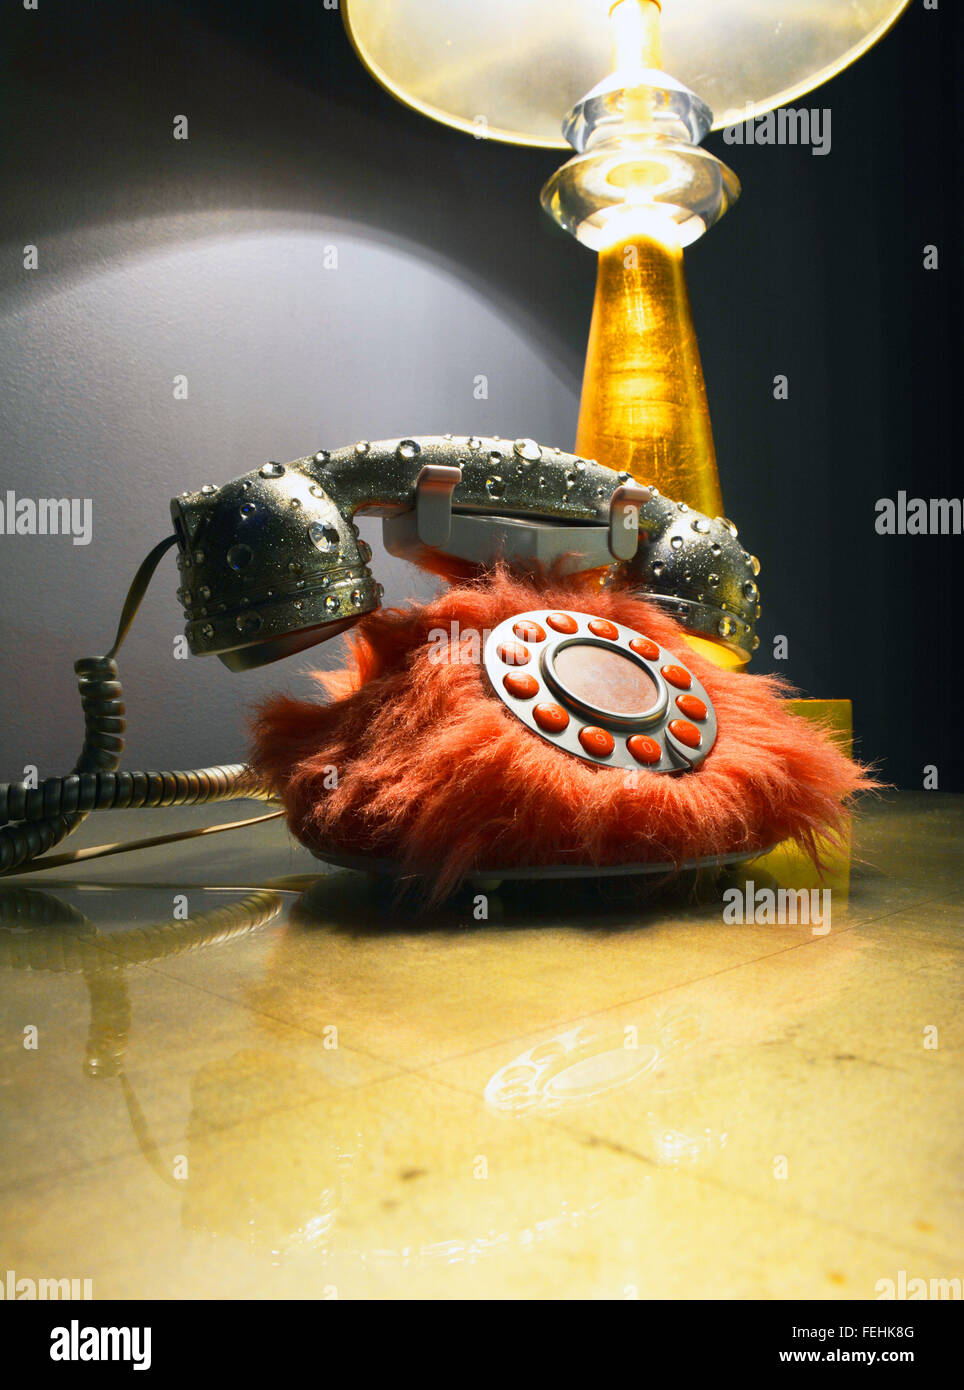 An unusual, artistic and wacky rotary phone decorated with orange fur and acrylic like bubbles on handset on table with lamp odd Stock Photo